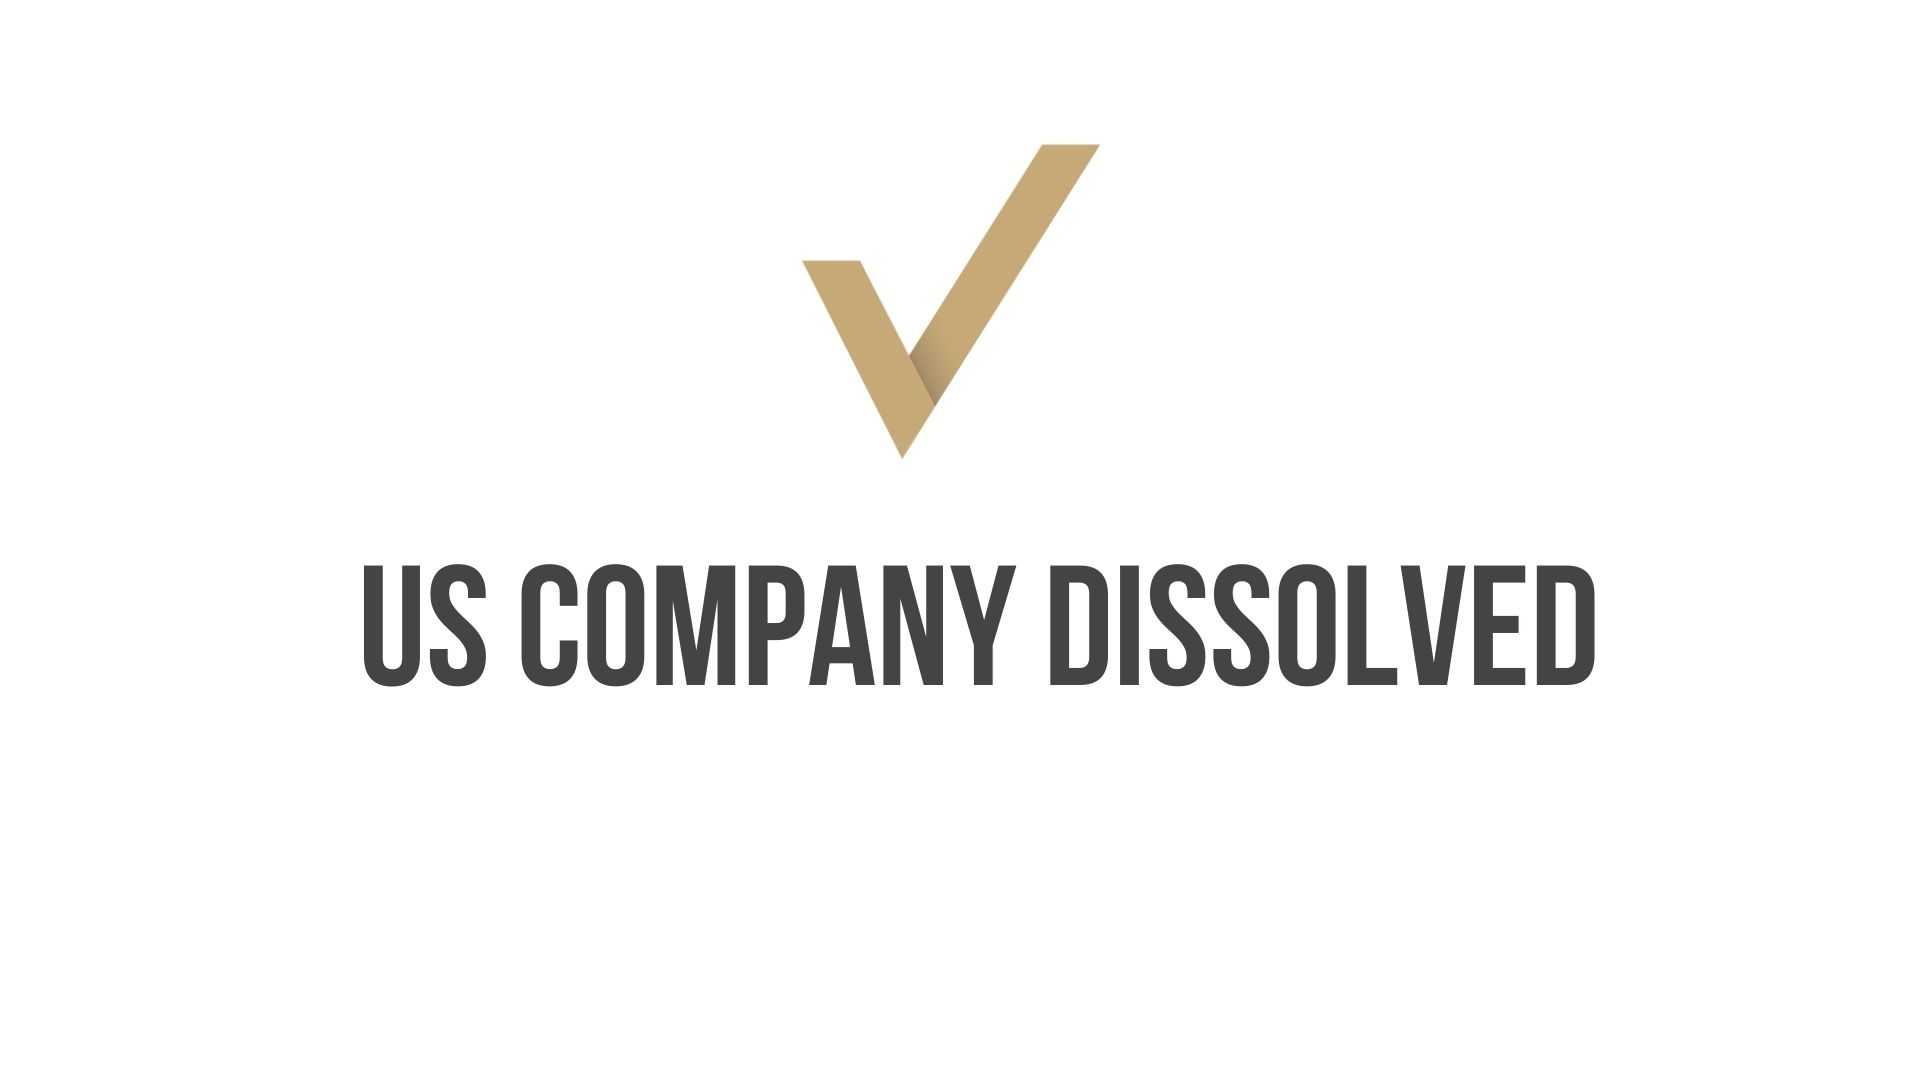 Limited Liability Company Dissolved